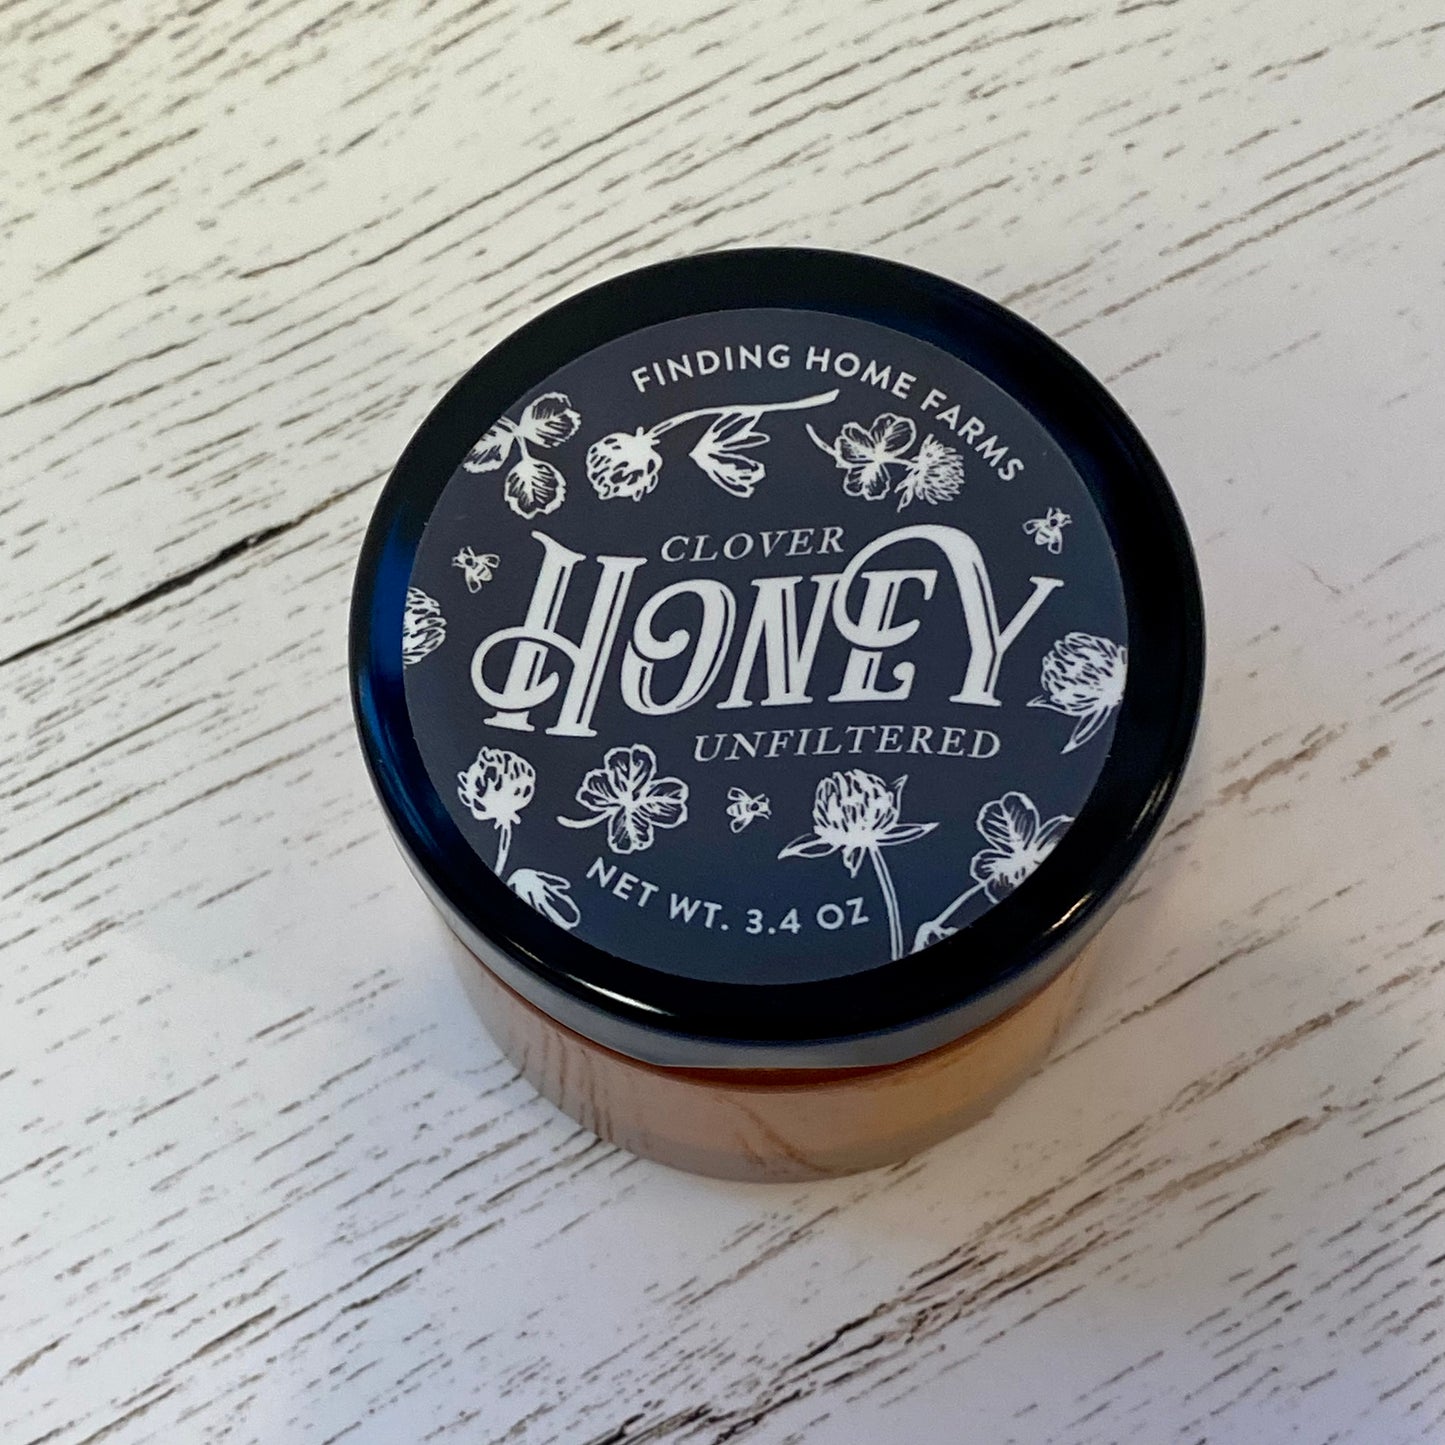 Unfiltered Clover Honey, Small